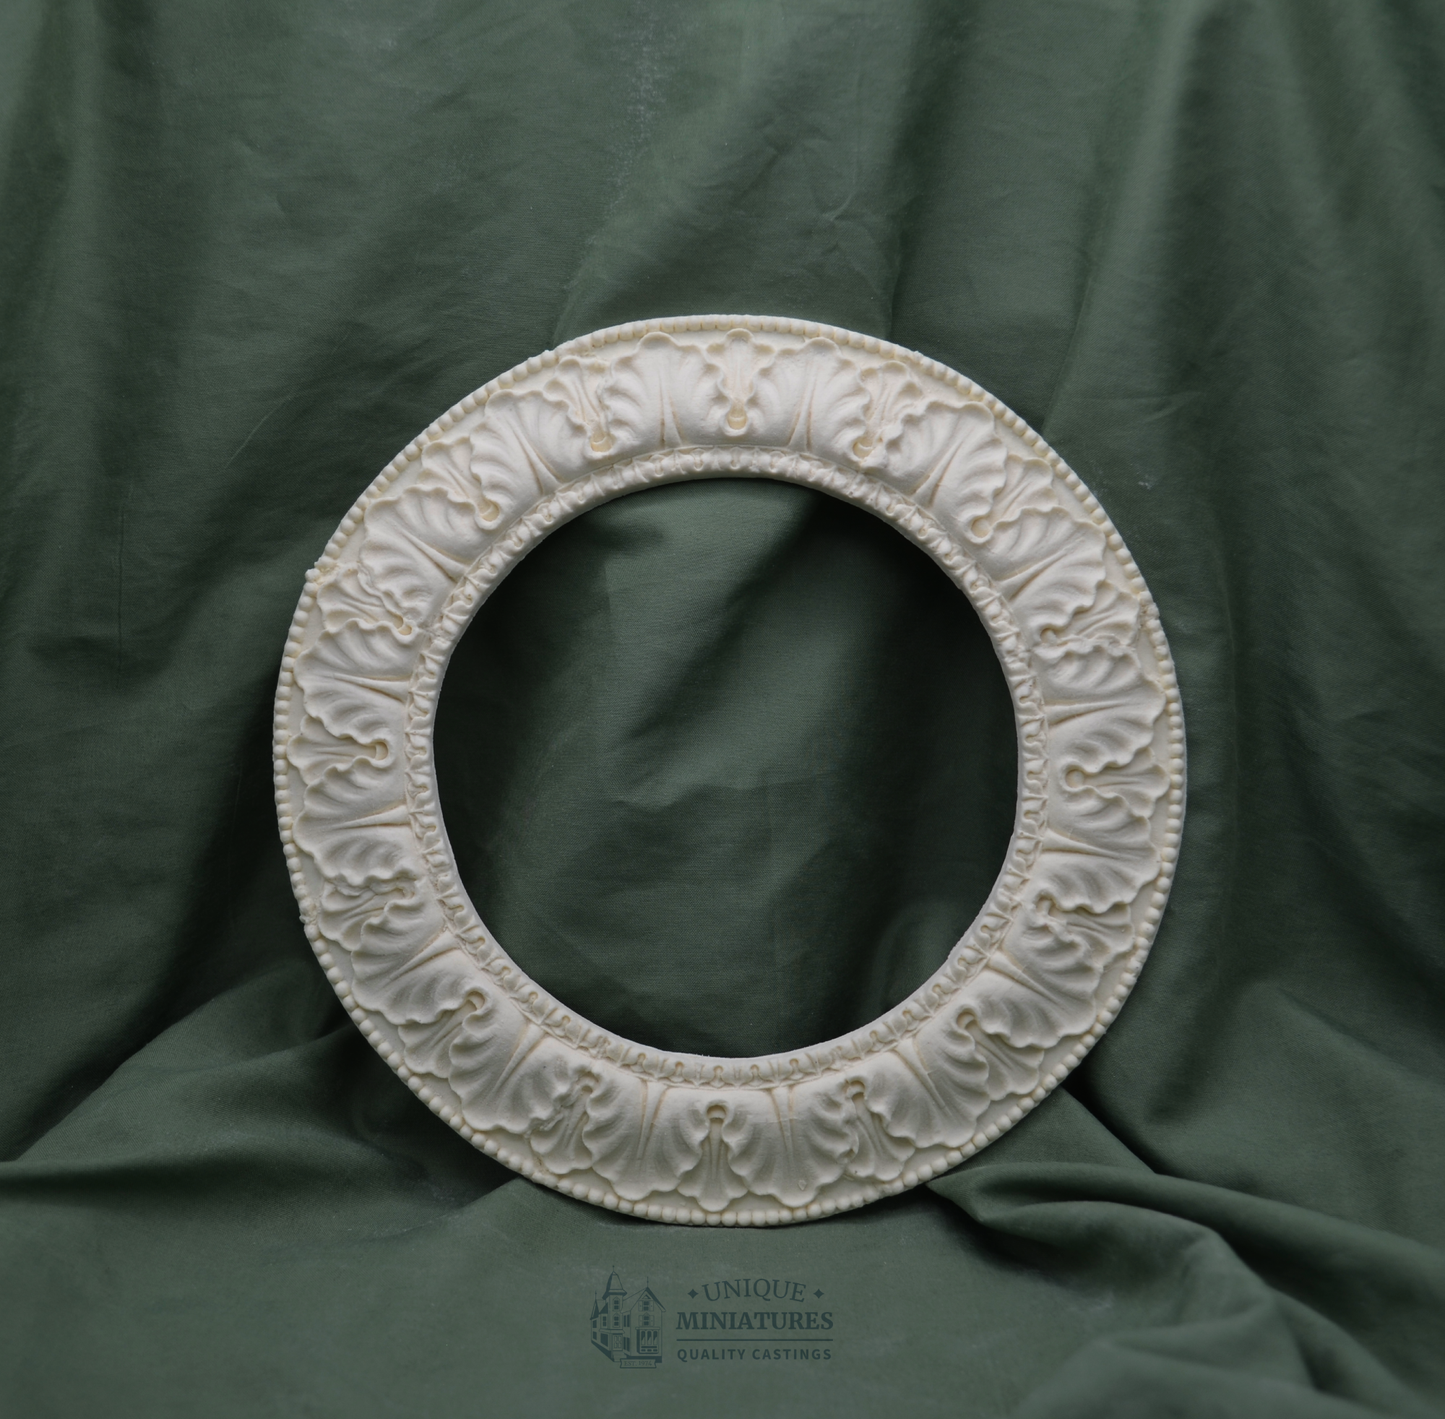 Circular Frond Ceiling Carving | Ornamentation for Dollhouse Miniatures